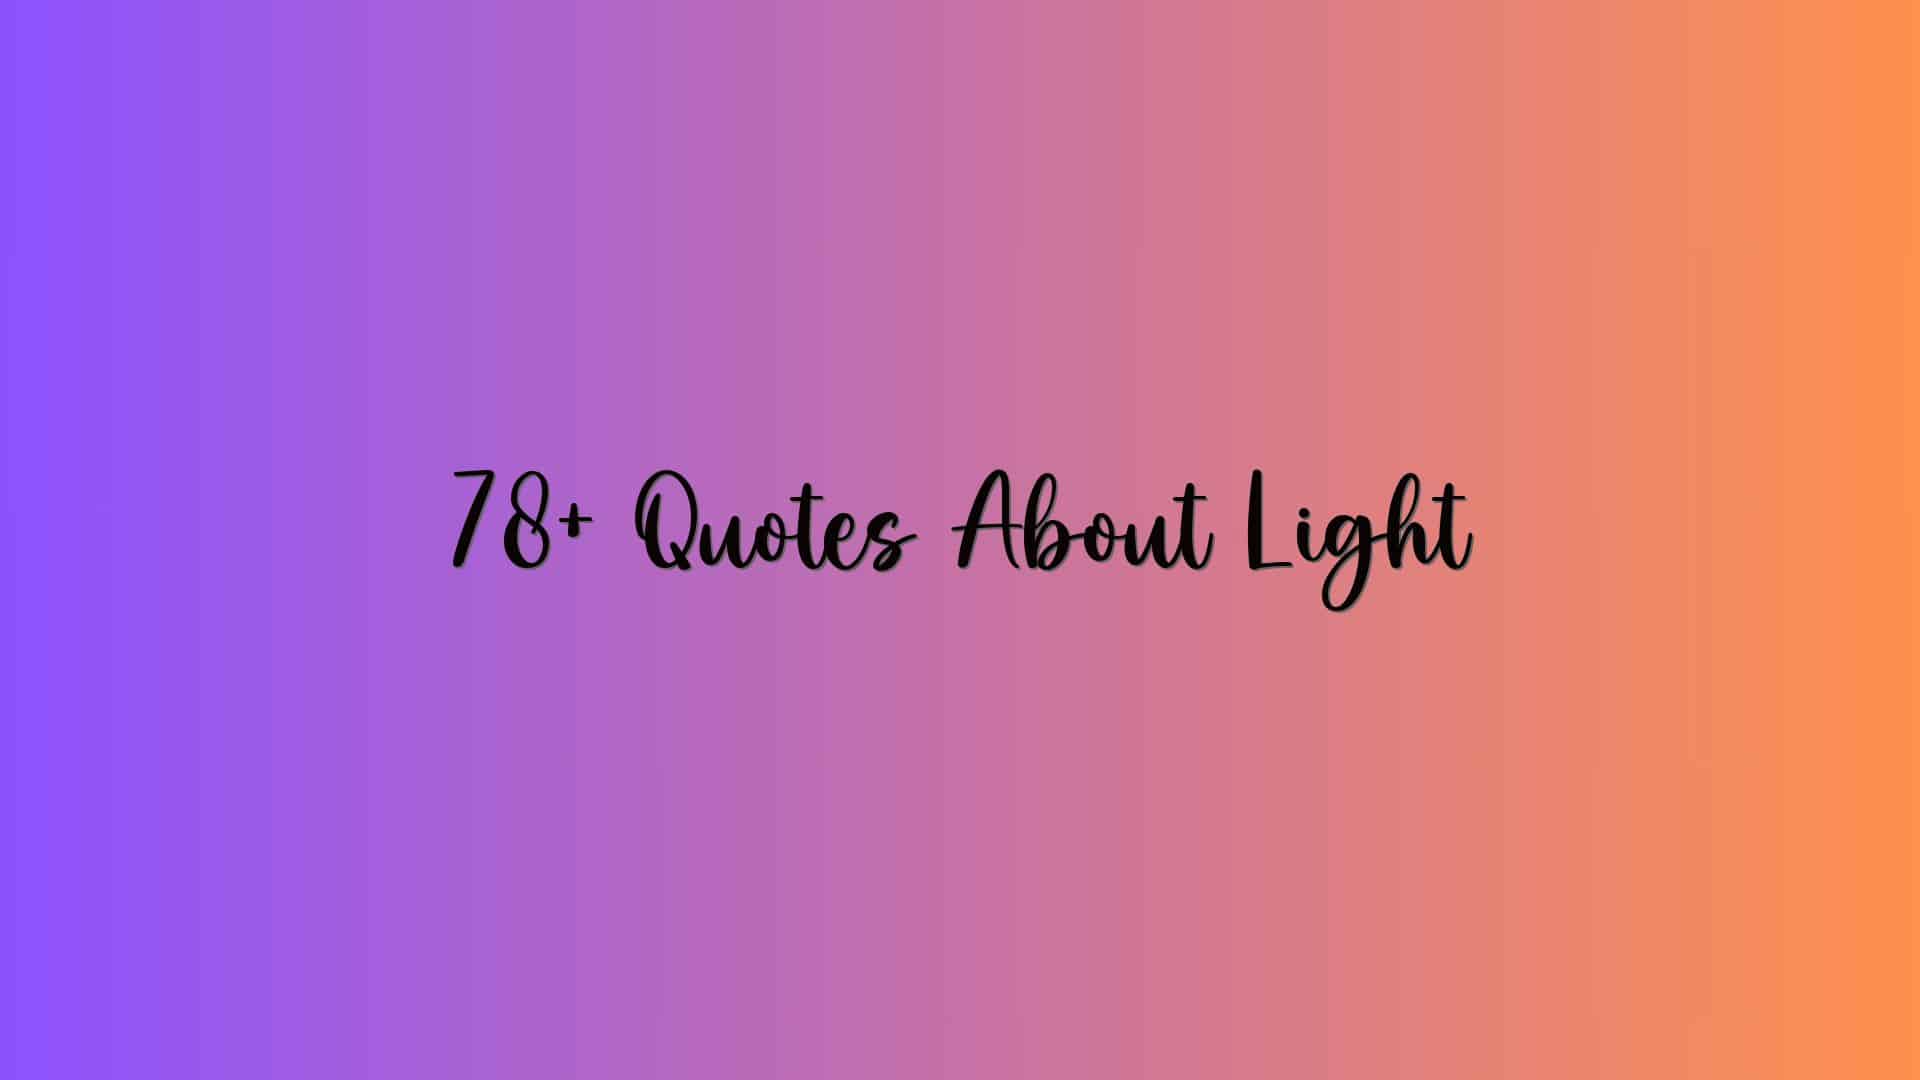 78+ Quotes About Light